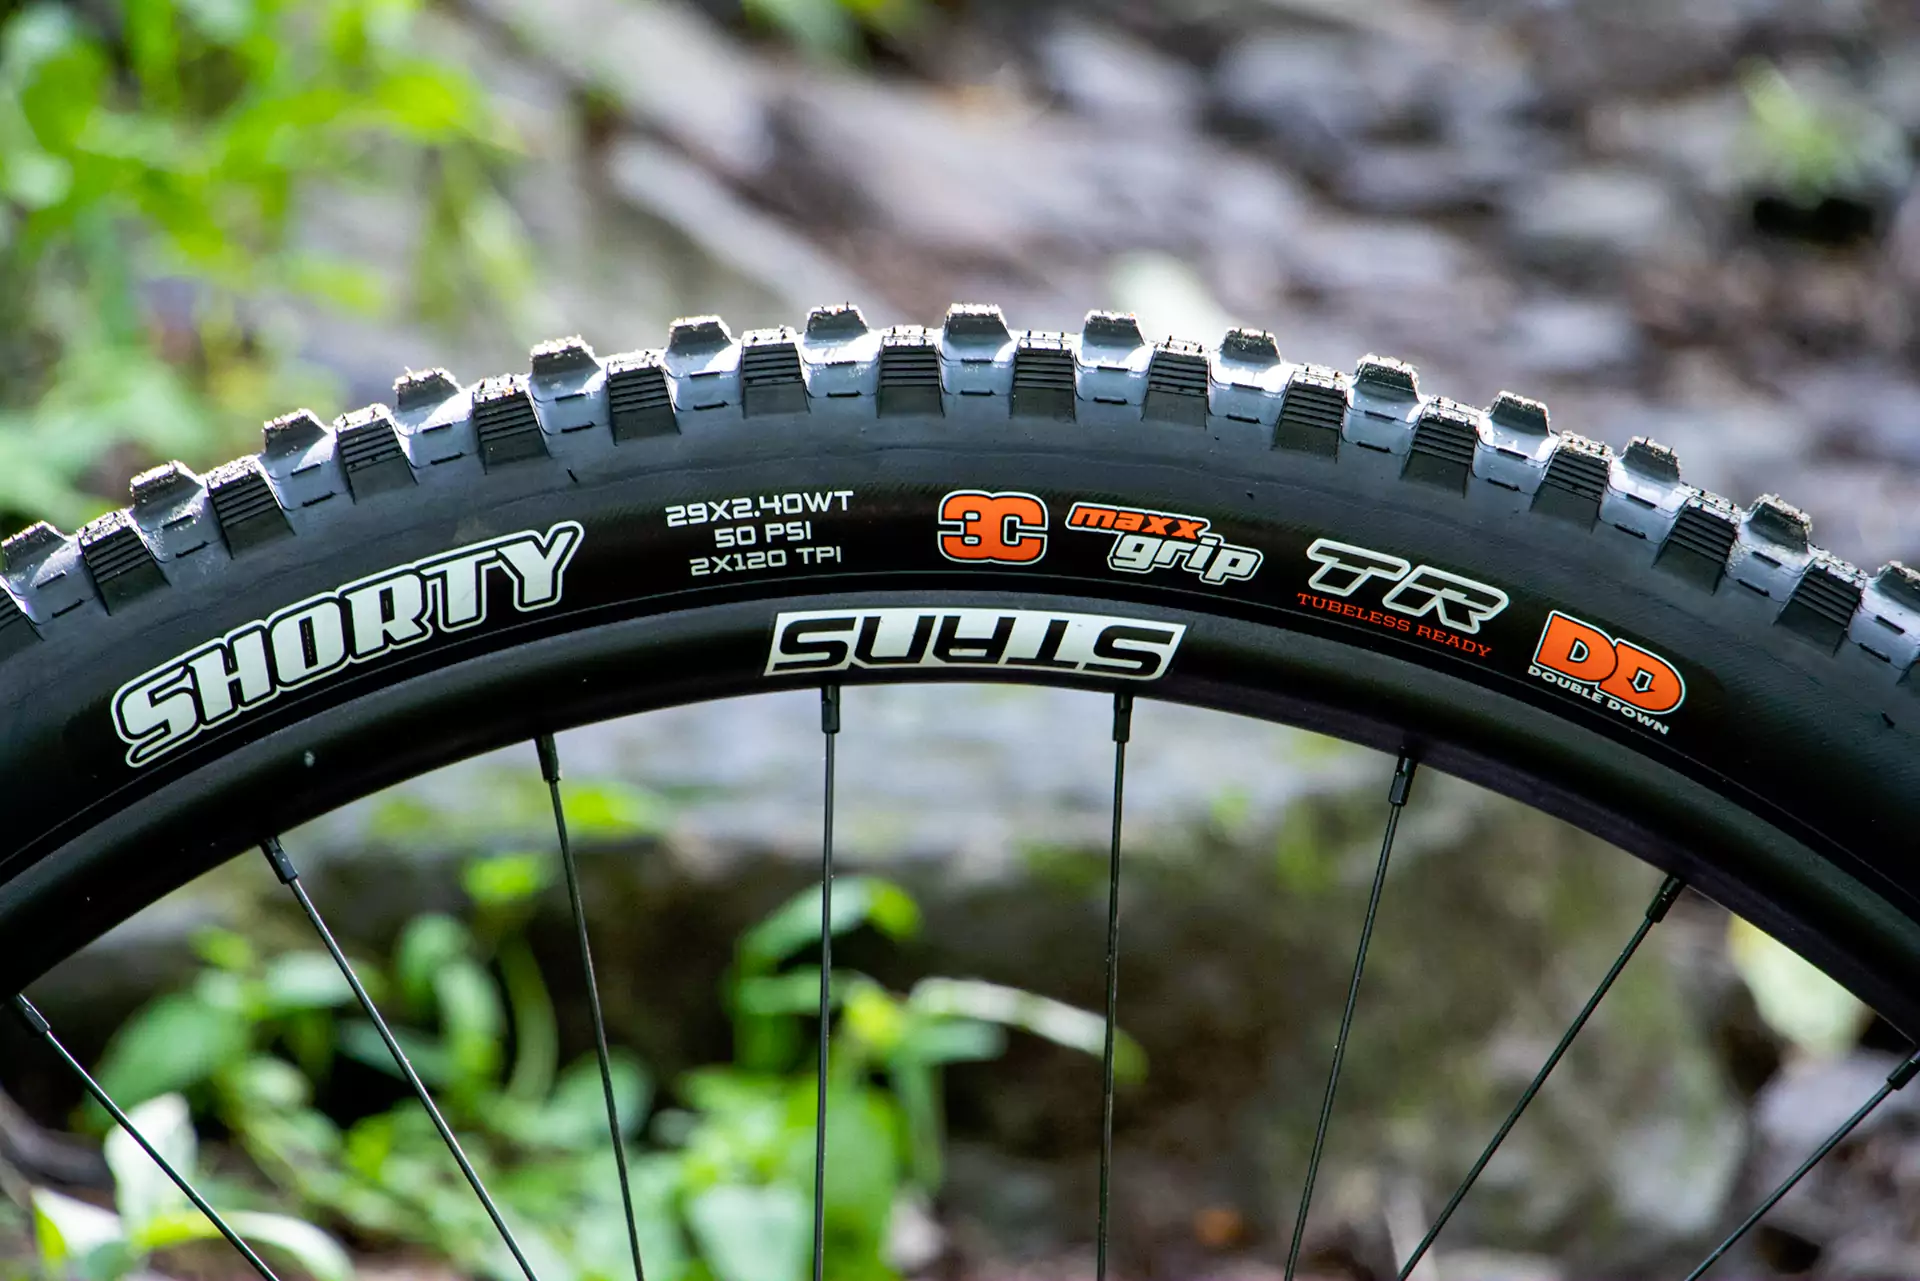 Tubeless Ready Maxxis Shorty bicycle tire.